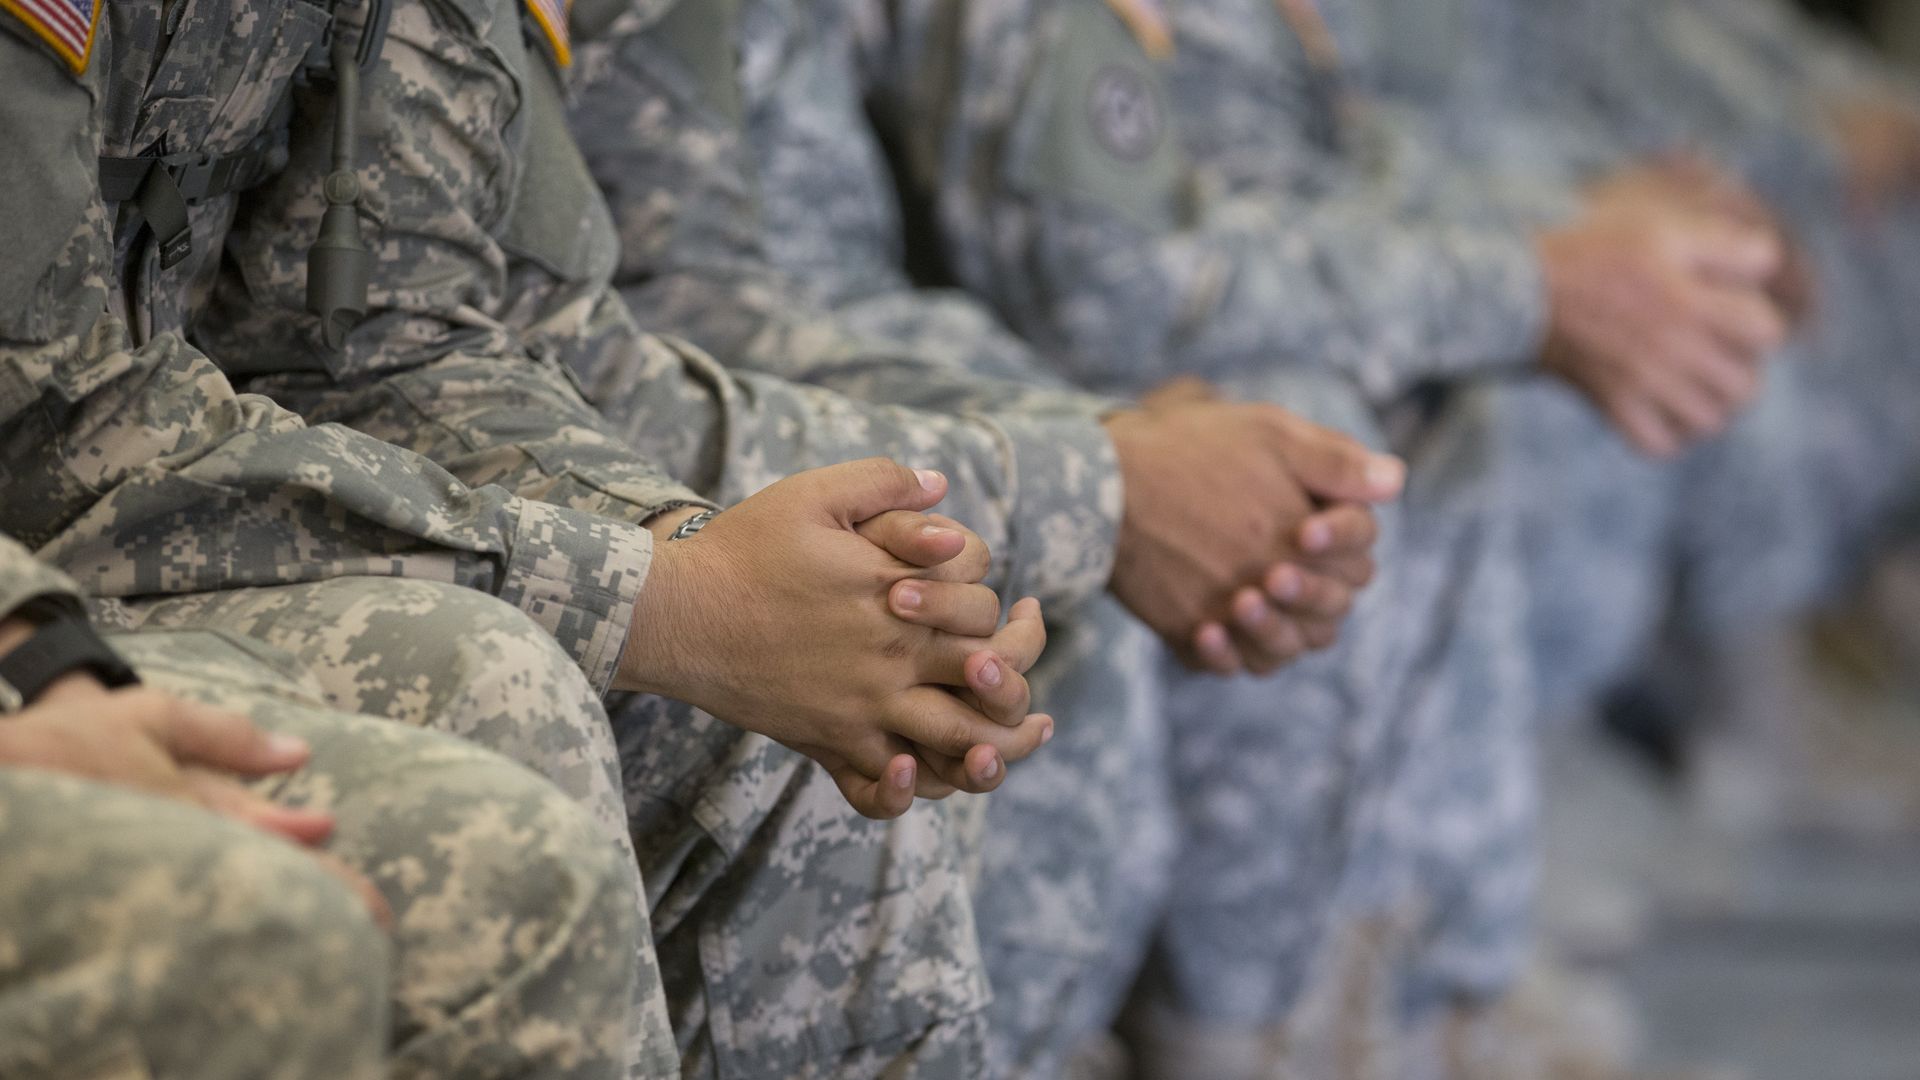 National Guard troops' hands clasped together as they sit in a row in uniform.